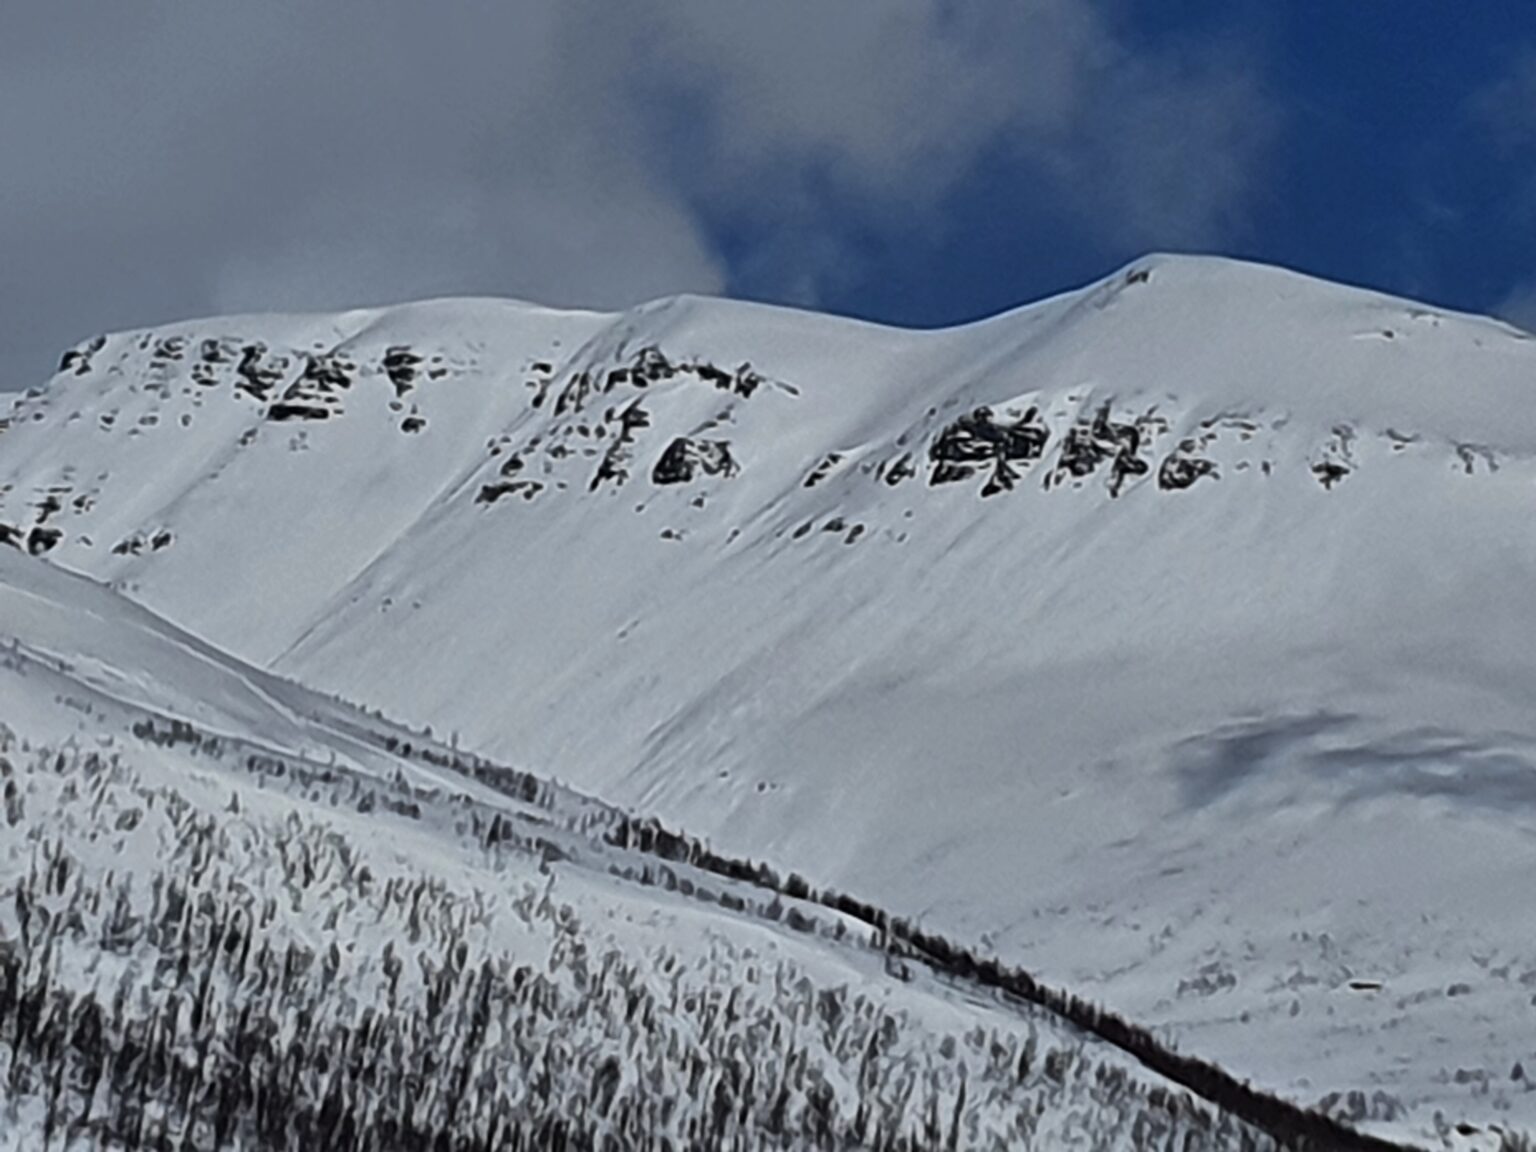 Looking at the West slopes of Sjufjellet in the Tamokdalen Valley